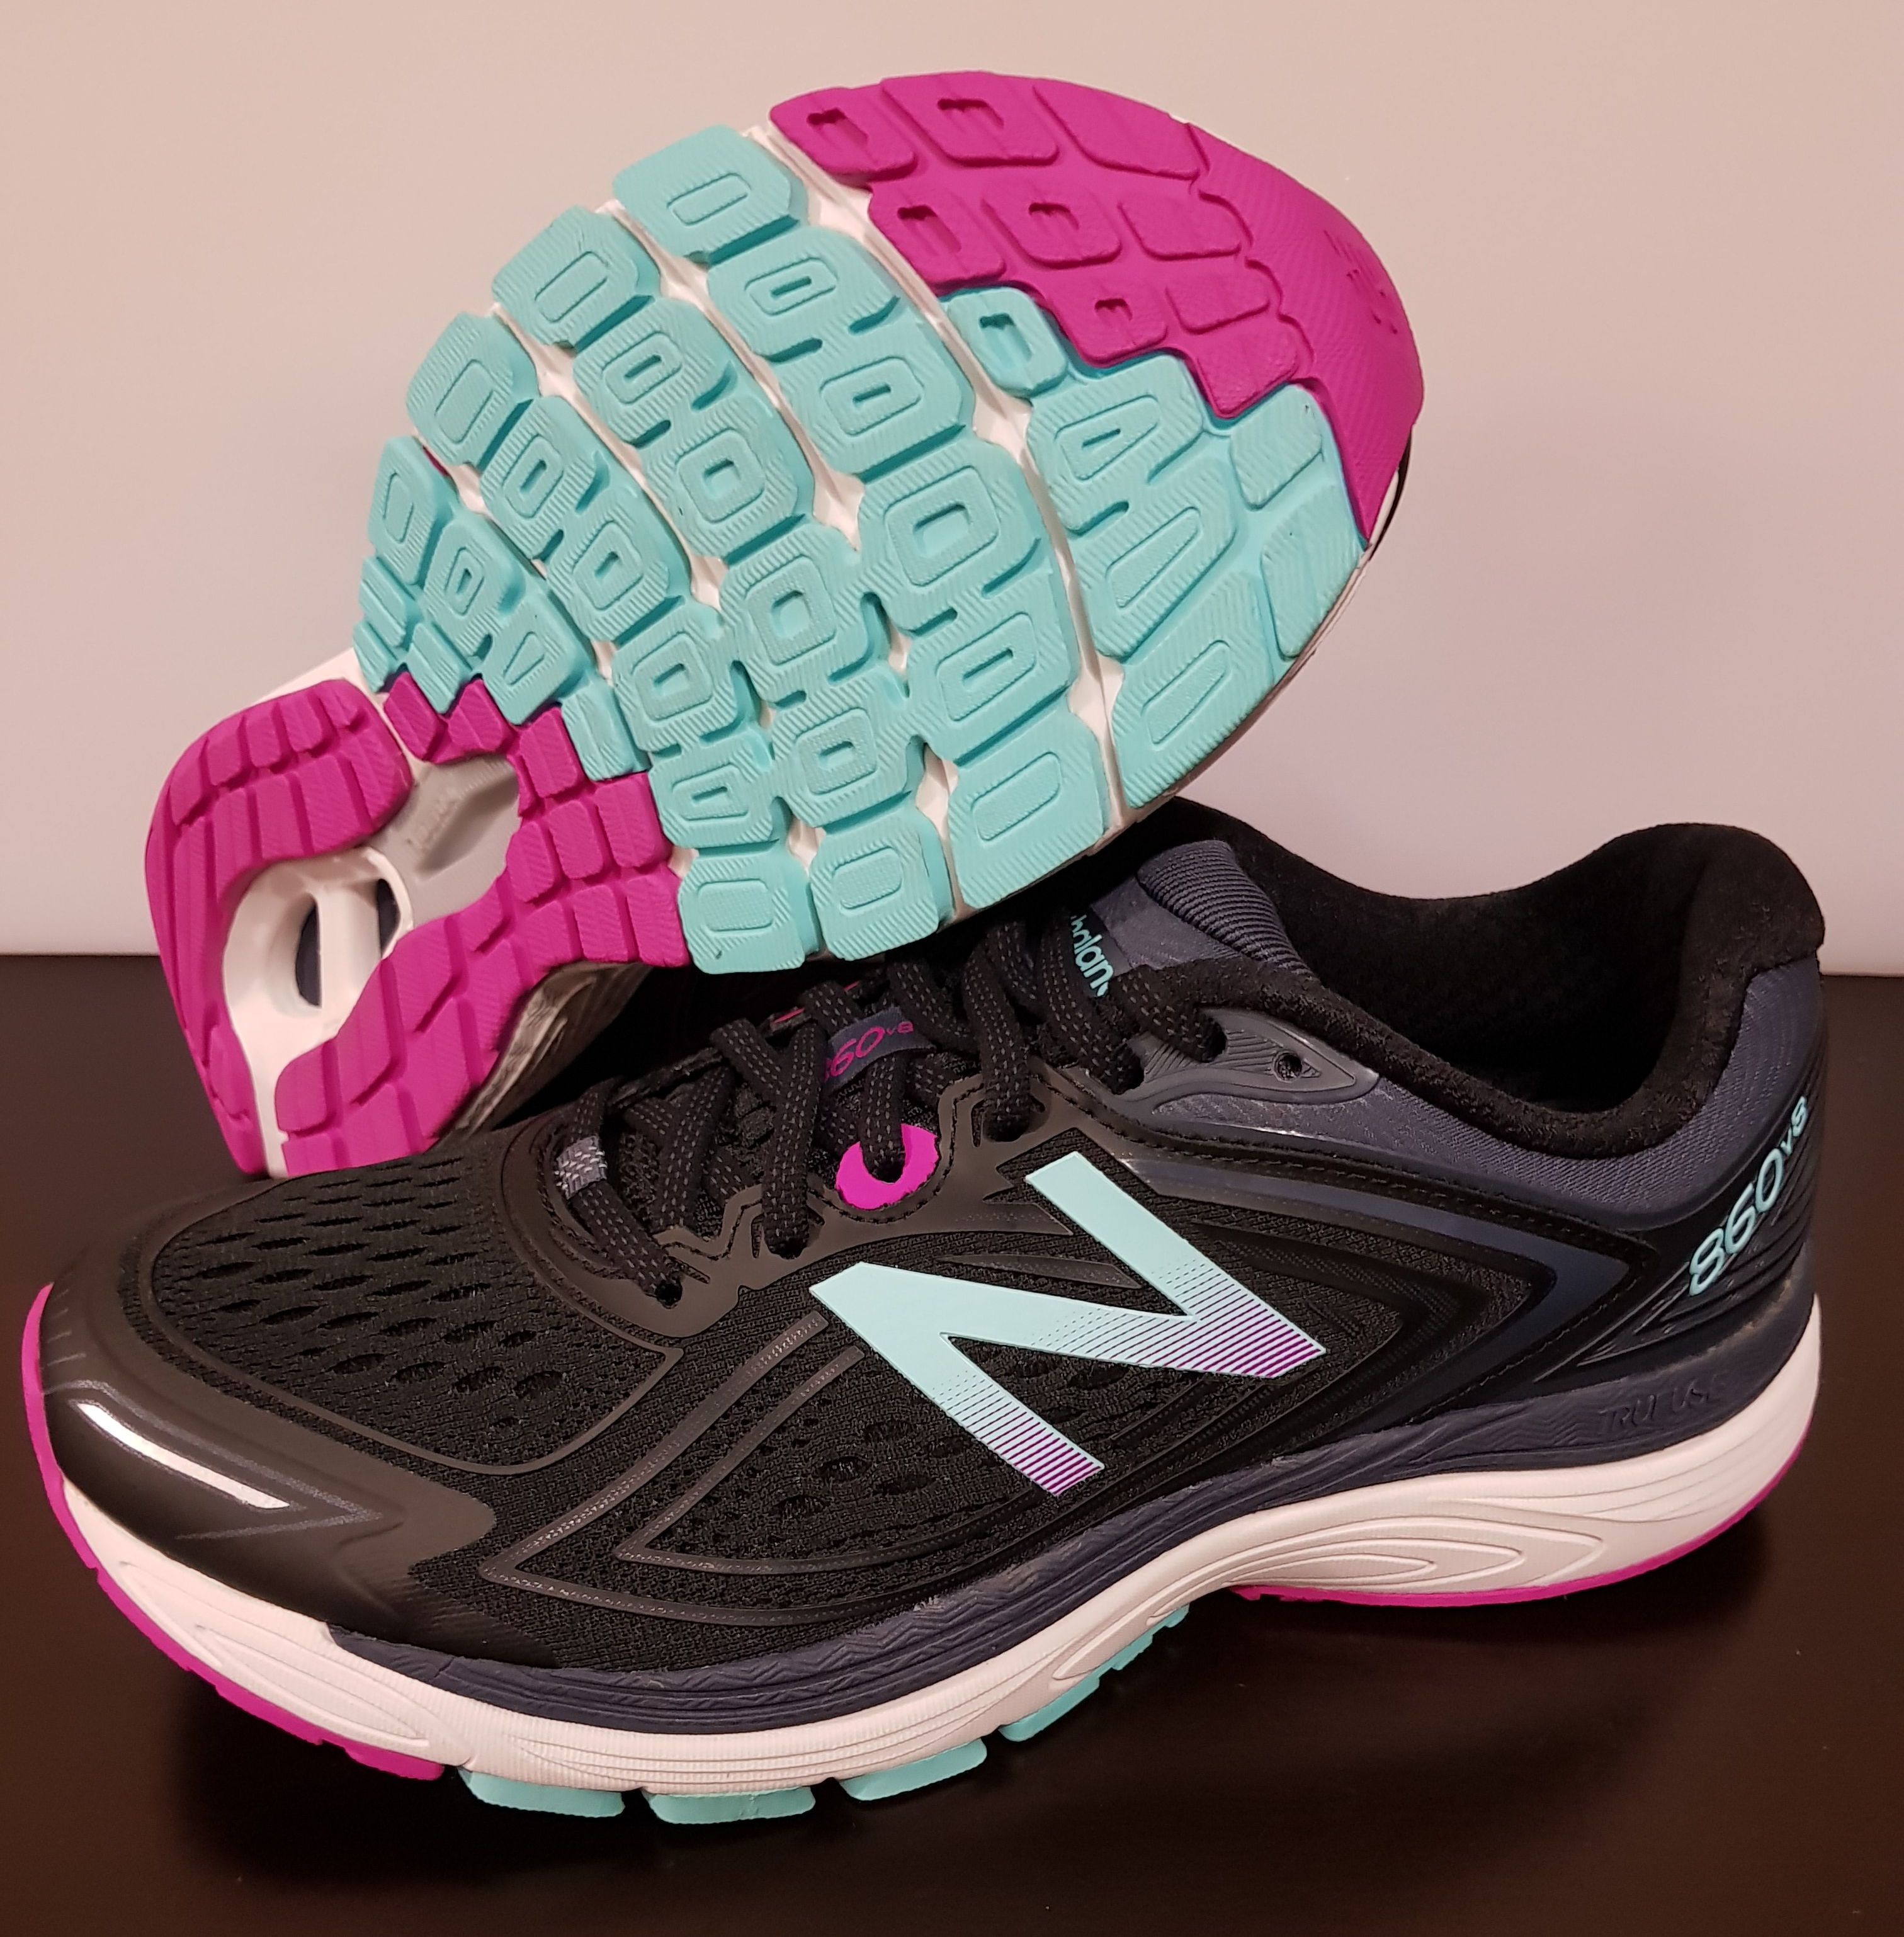 New Balance 860v8 Mens Running Shoes Outlet Store, UP TO 58% OFF